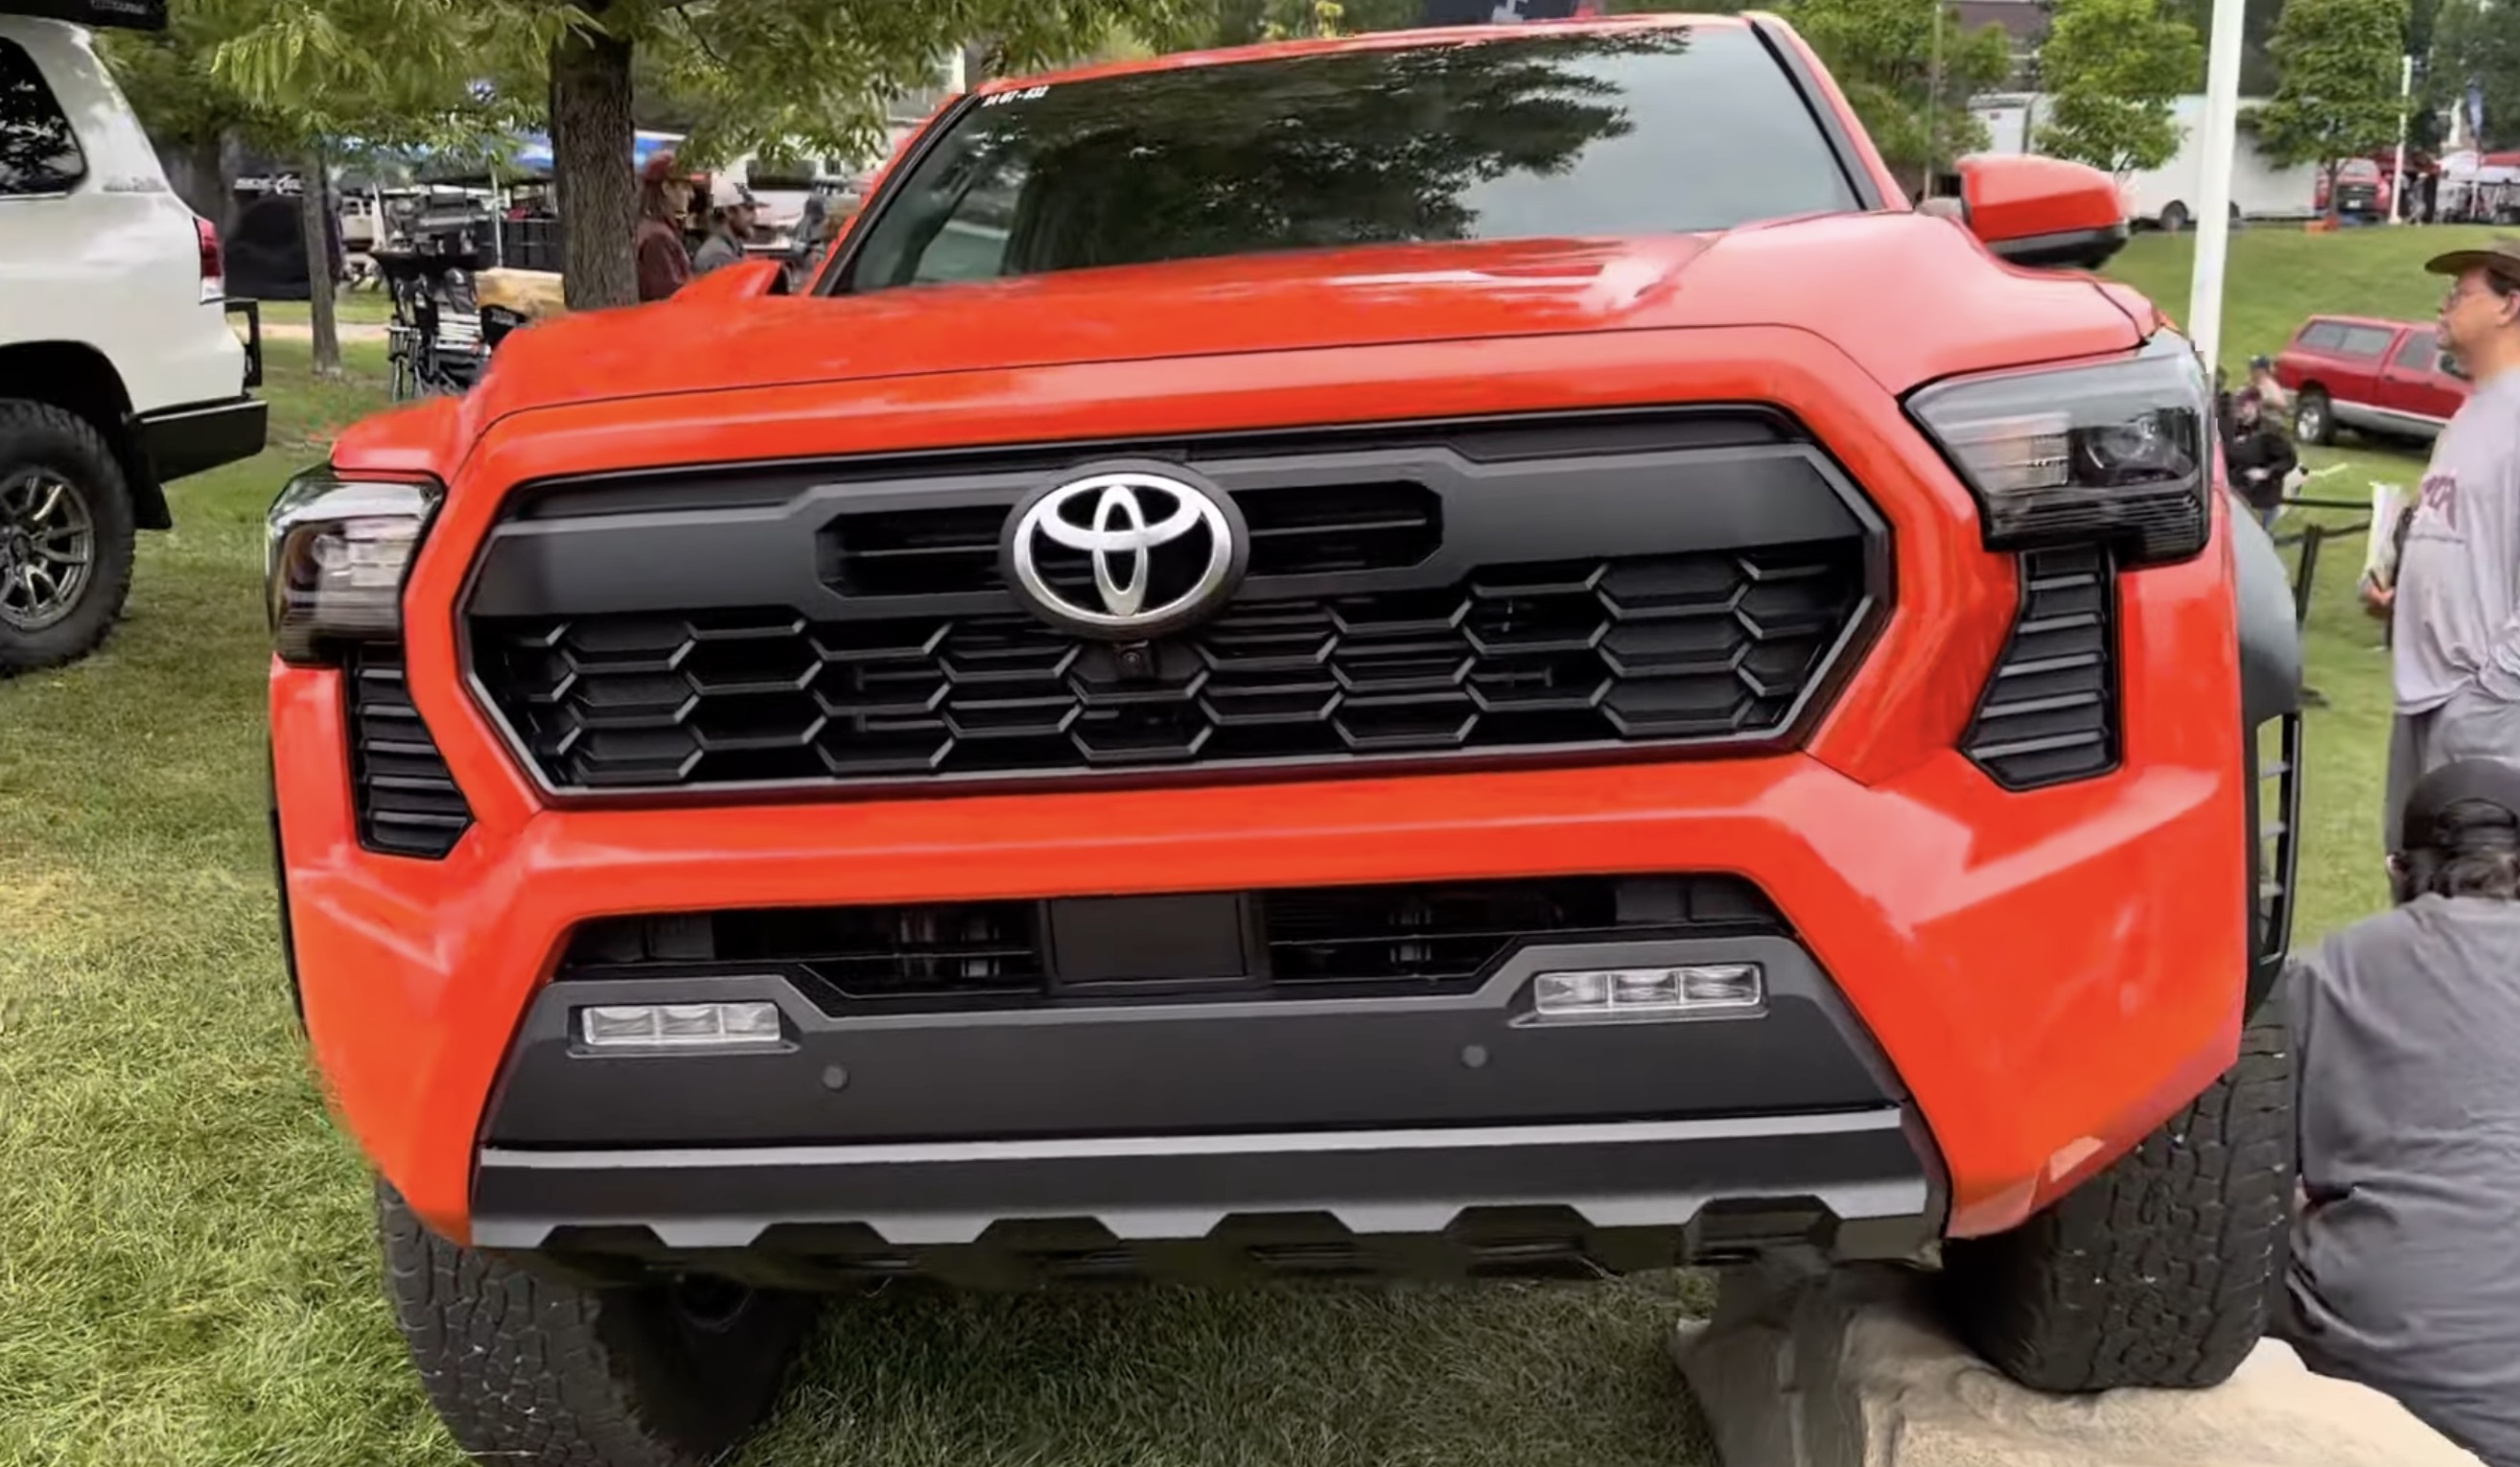 2024 Tacoma 2024 Tacoma TRD Off-Road has first official public reveal @ Overland Expo! [Videos + Photos] solar-octane-2024-tacoma-trd-off-road-3-